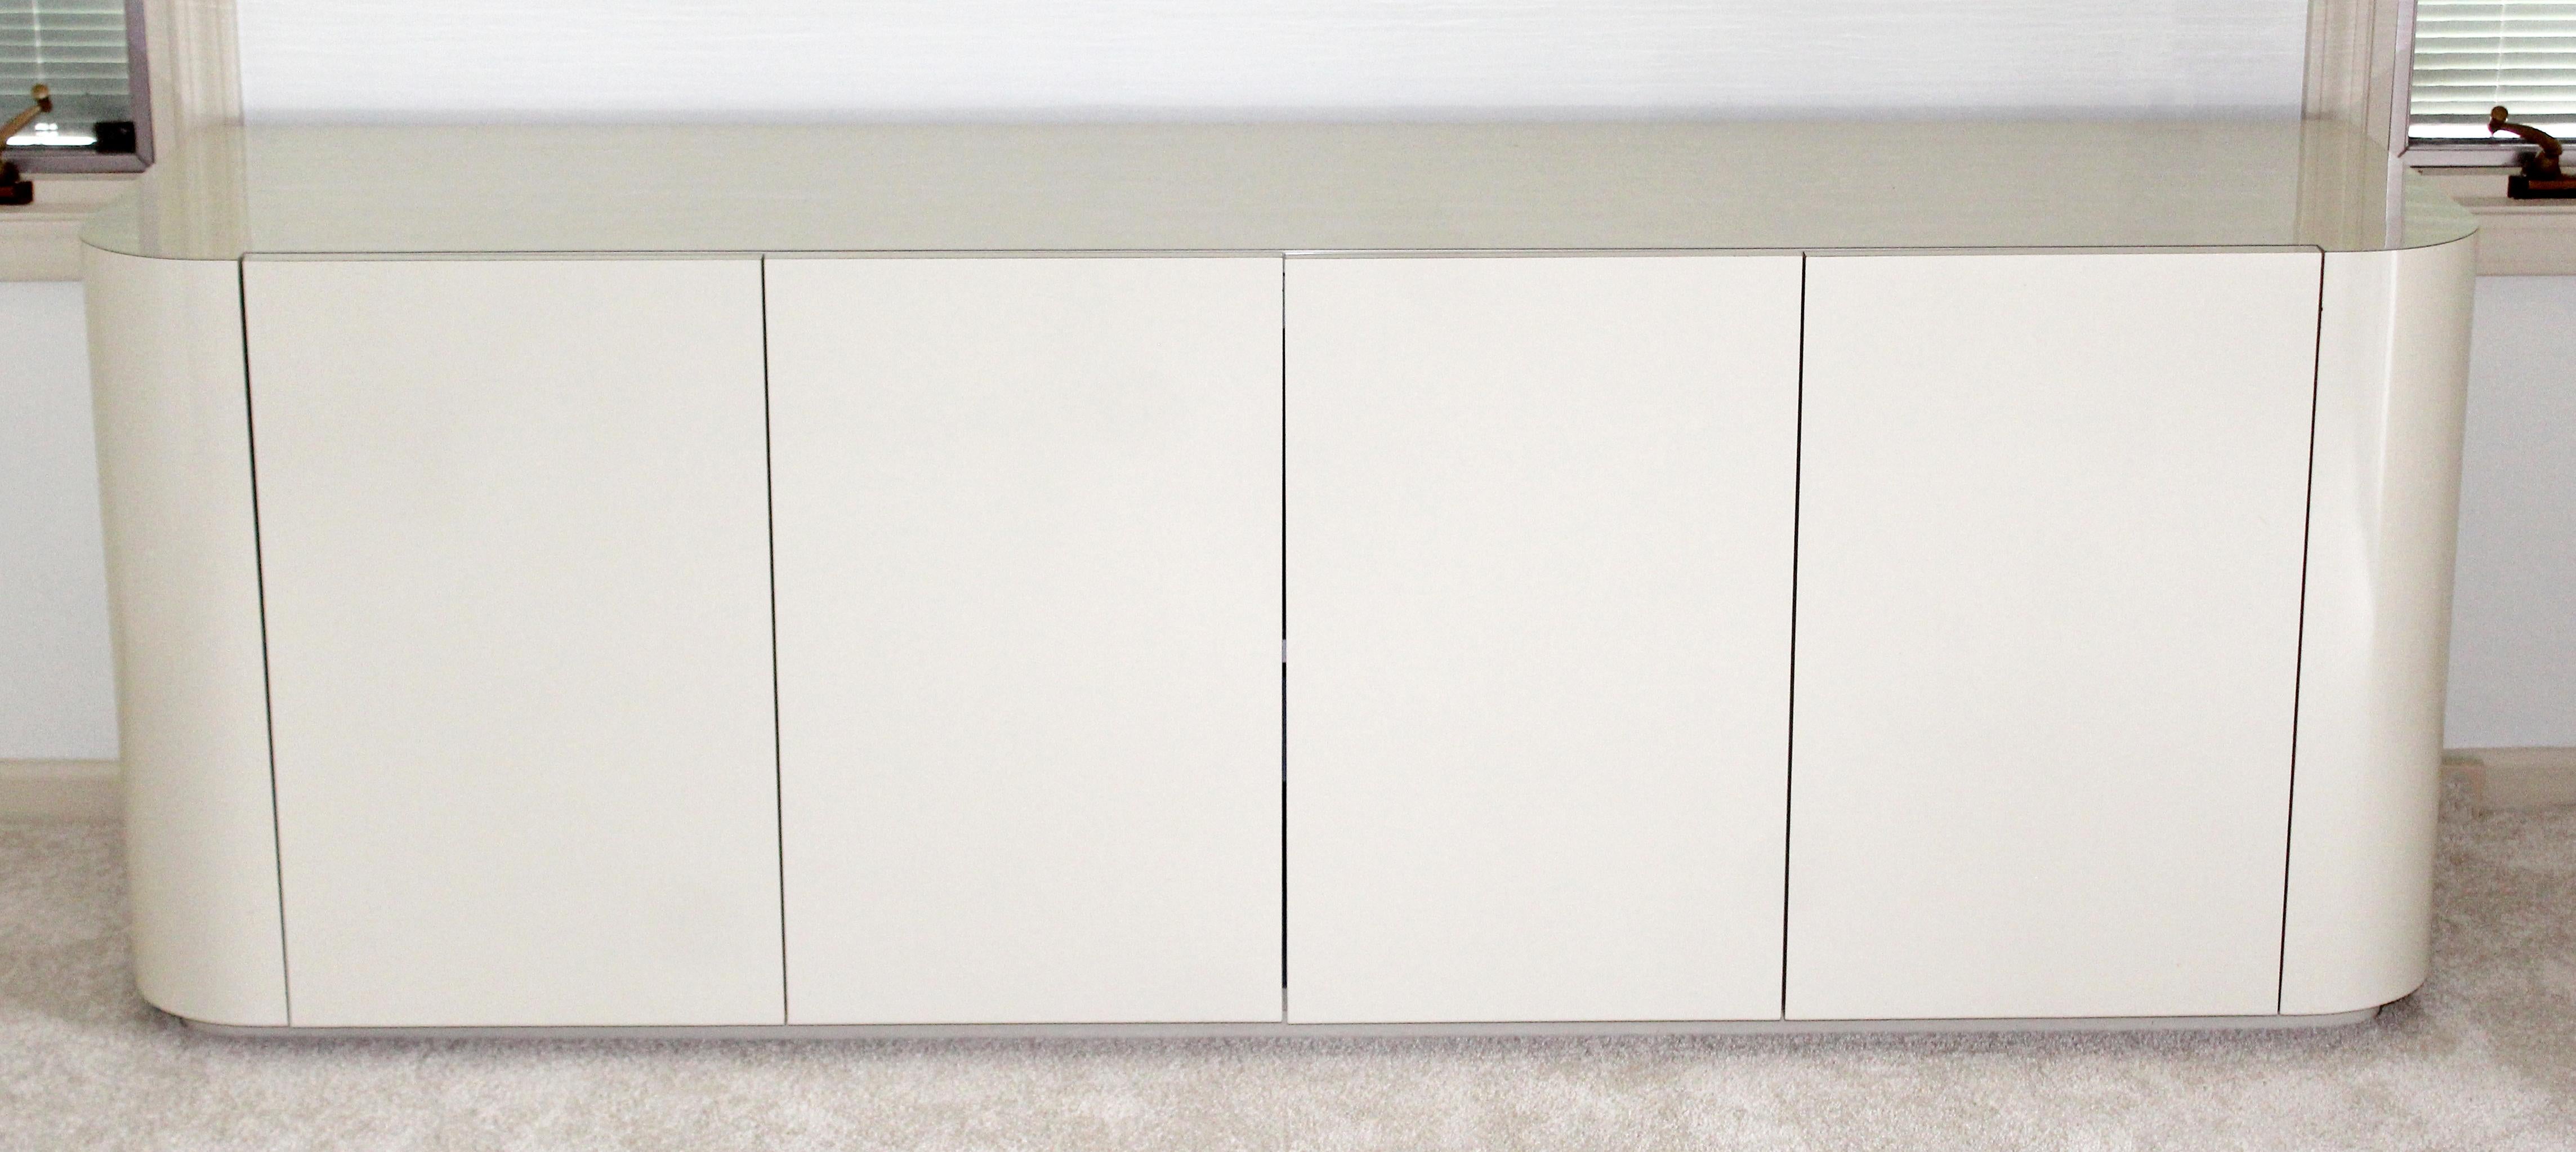 For your consideration is a fabulous, white lacquered credenza cabinet, with four doors, circa 1980s. In very good condition. The dimensions are 77